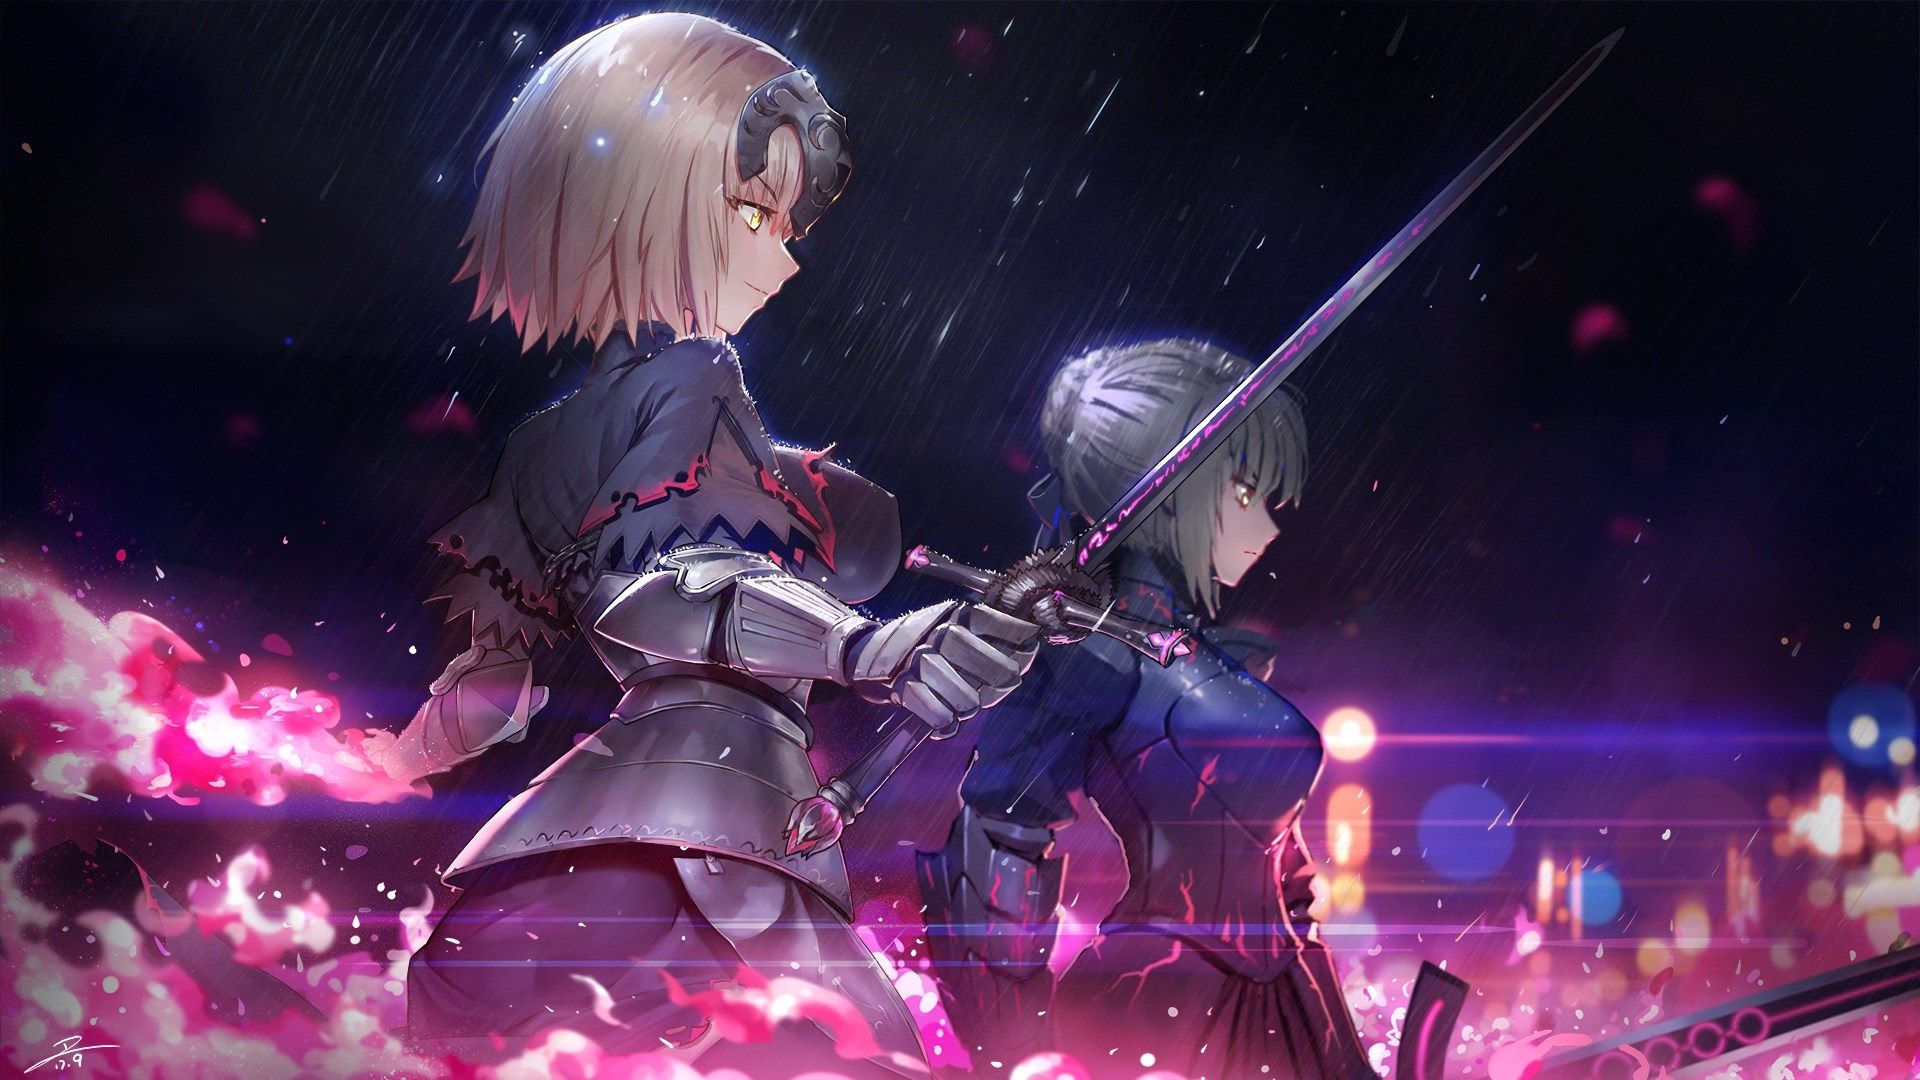 Anime Wallpaper Hd For Laptop - Saber Alter And Jeanne Alter - 1360x768  Wallpaper 